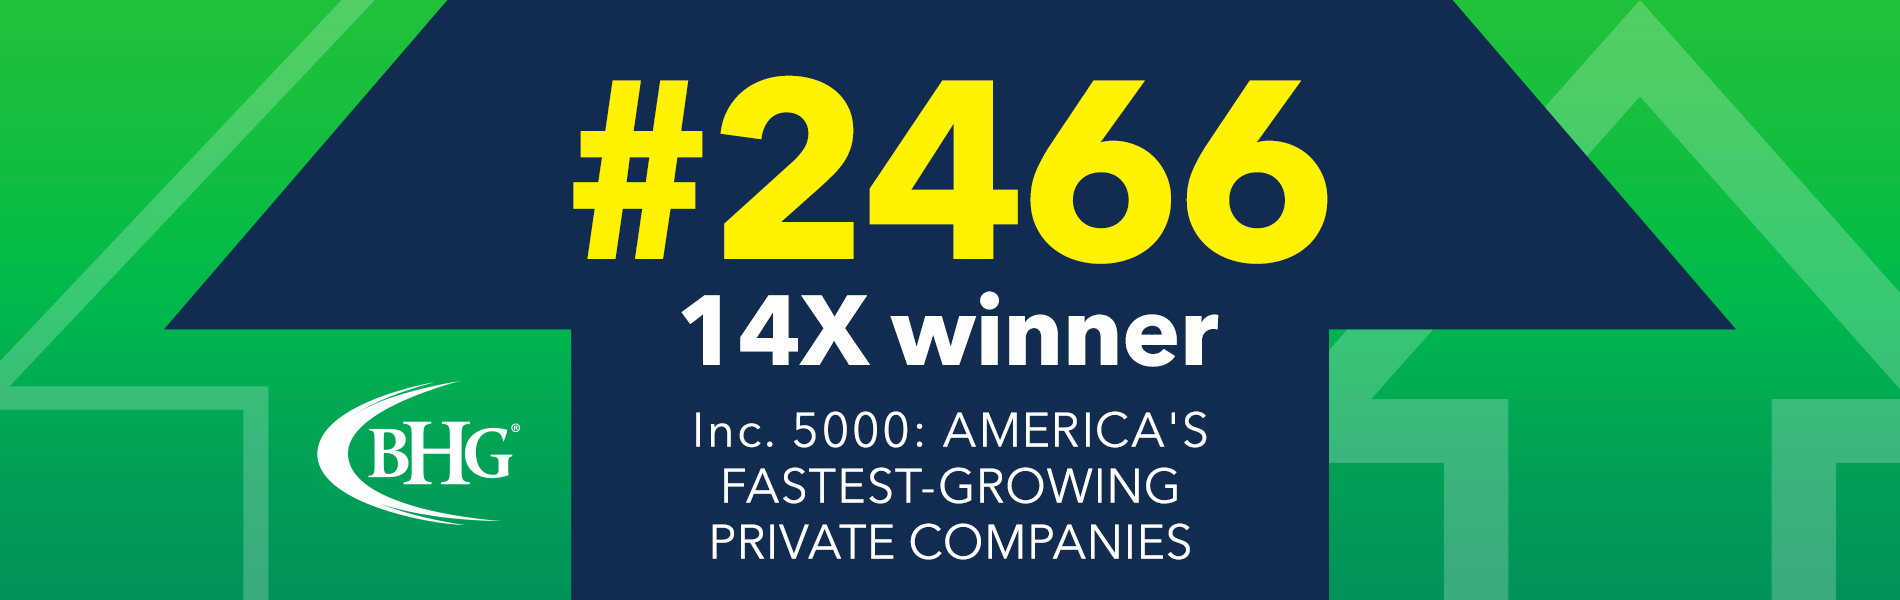 #2466 | 14X Winner | Inc. 5000: America's fastest-growing private companies